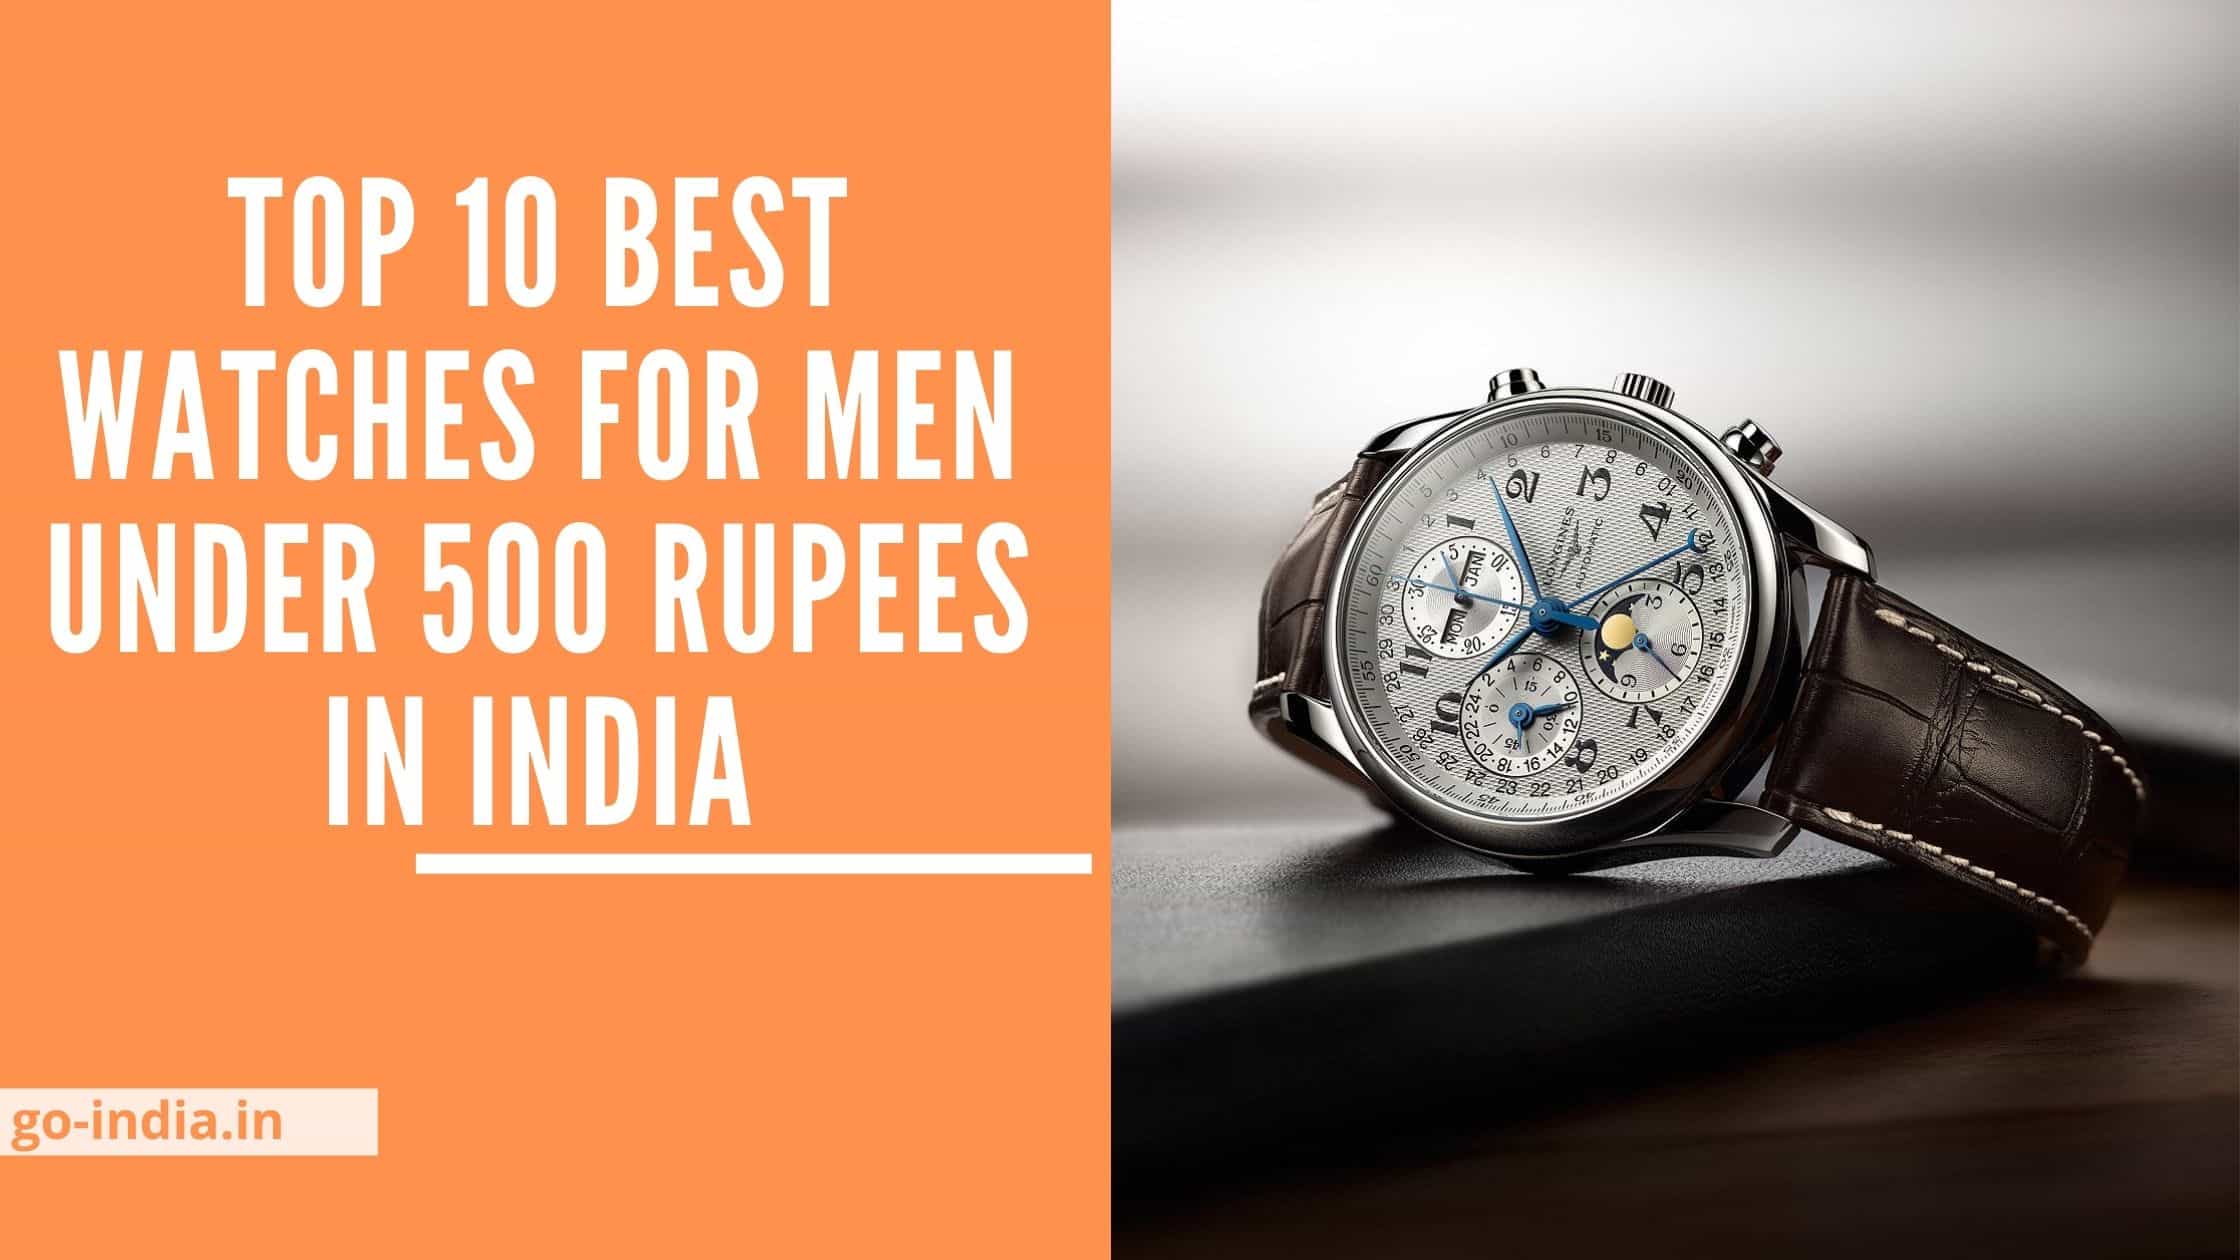 Top 10 Best Watches For Men Under 500 Rupees in India